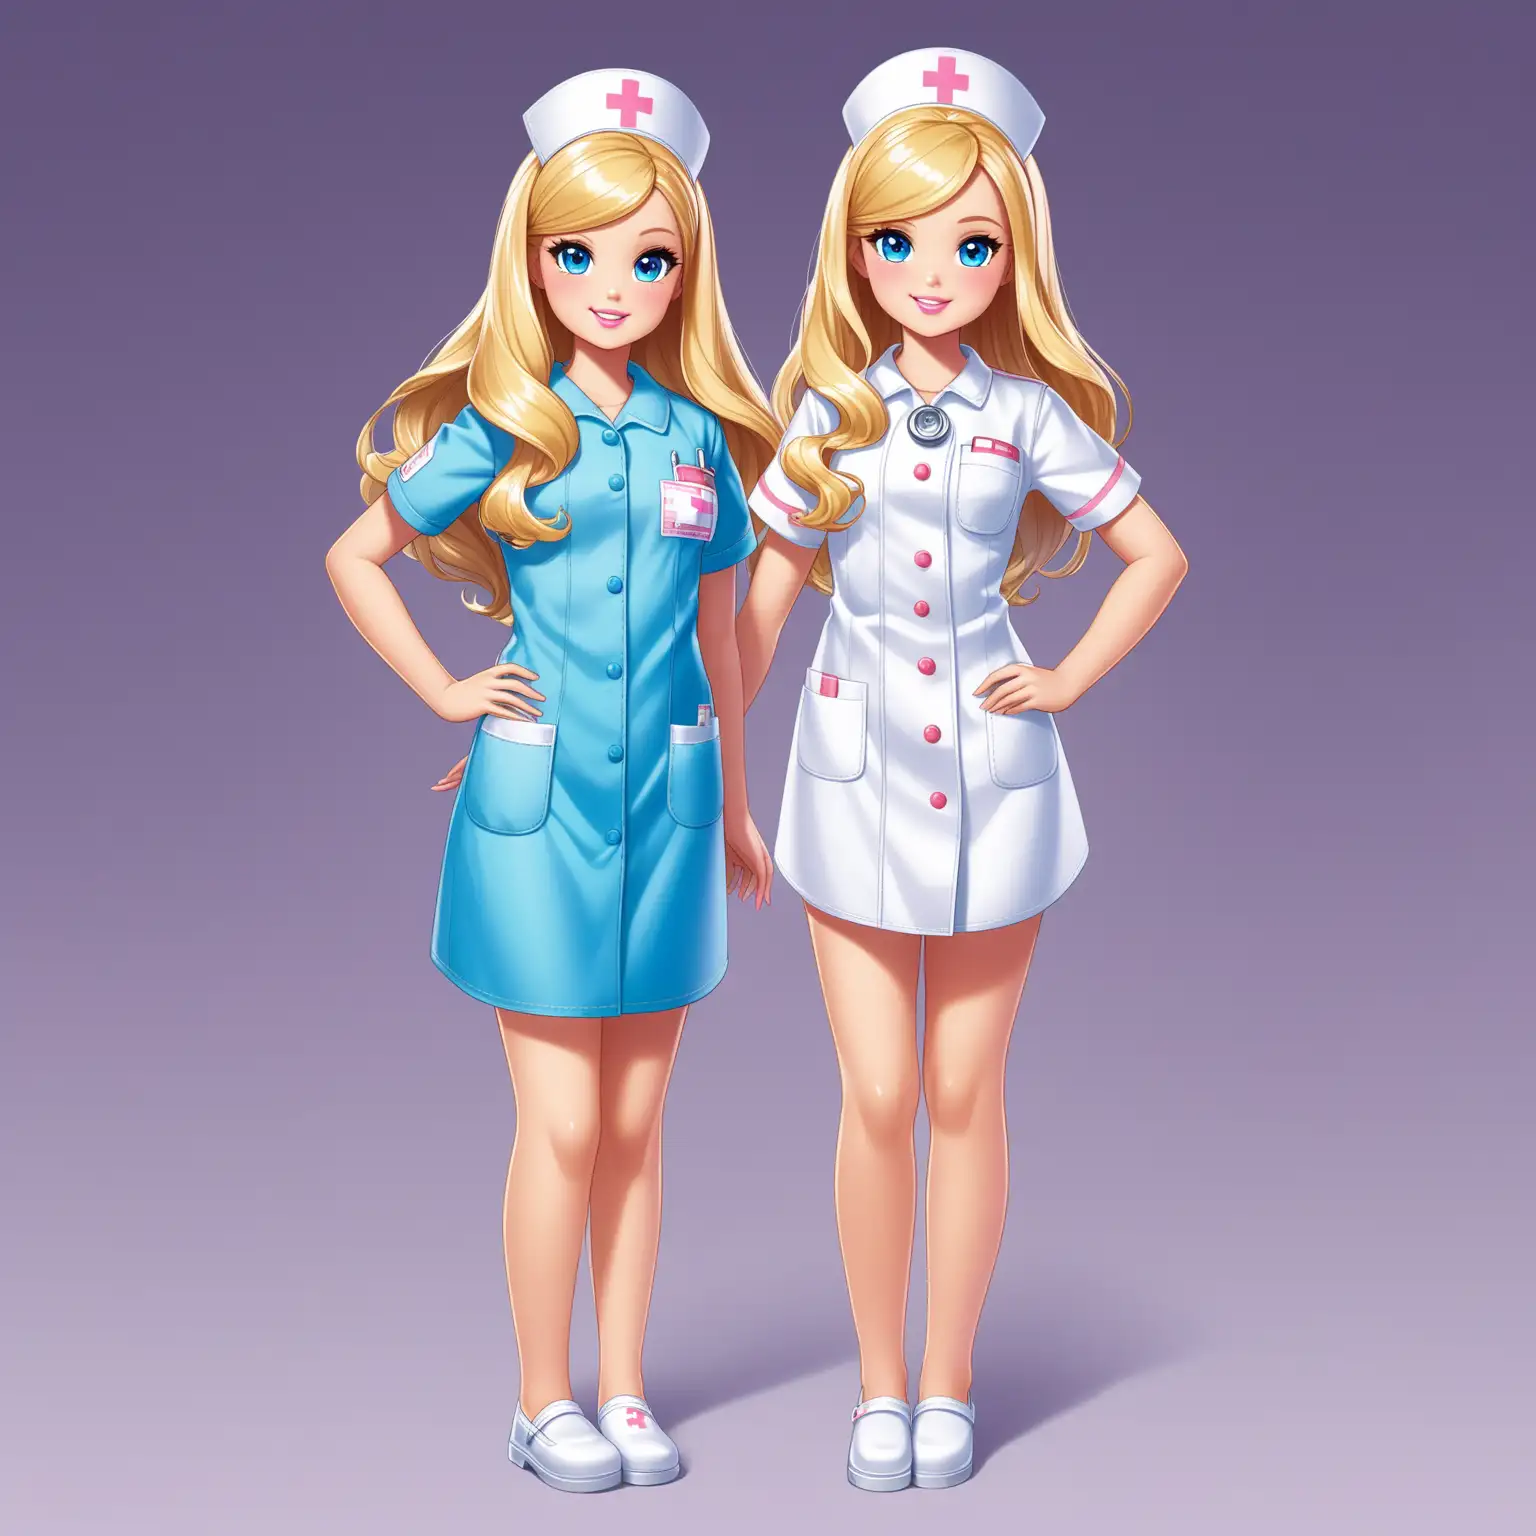 Chelsea from Barbie, 12 years old, measuring 140 cm and weighing 30 kg  mince yeux bleus cheveux blonds longs ondulés, seins B cup, nurse uniform full body
